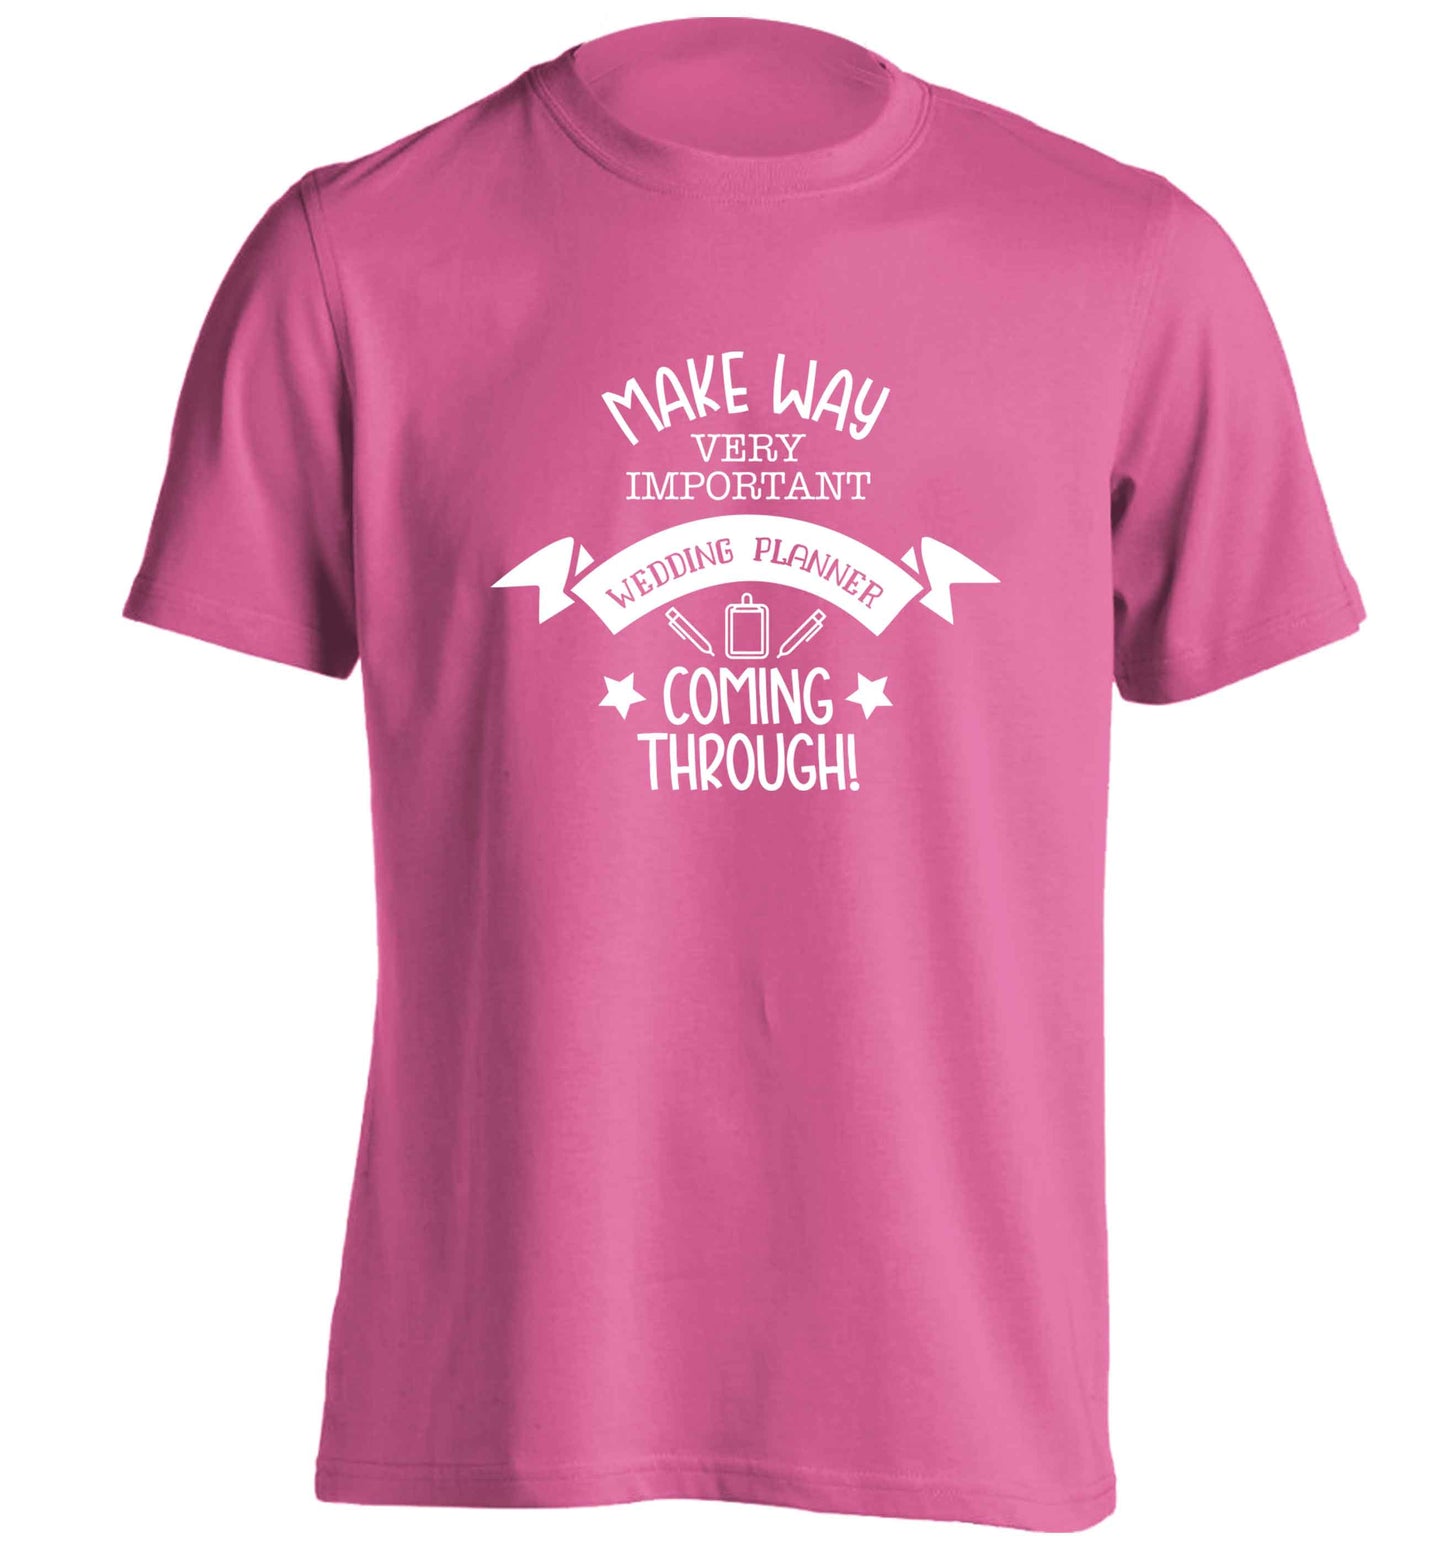 Make way very important wedding planner coming through adults unisex pink Tshirt 2XL